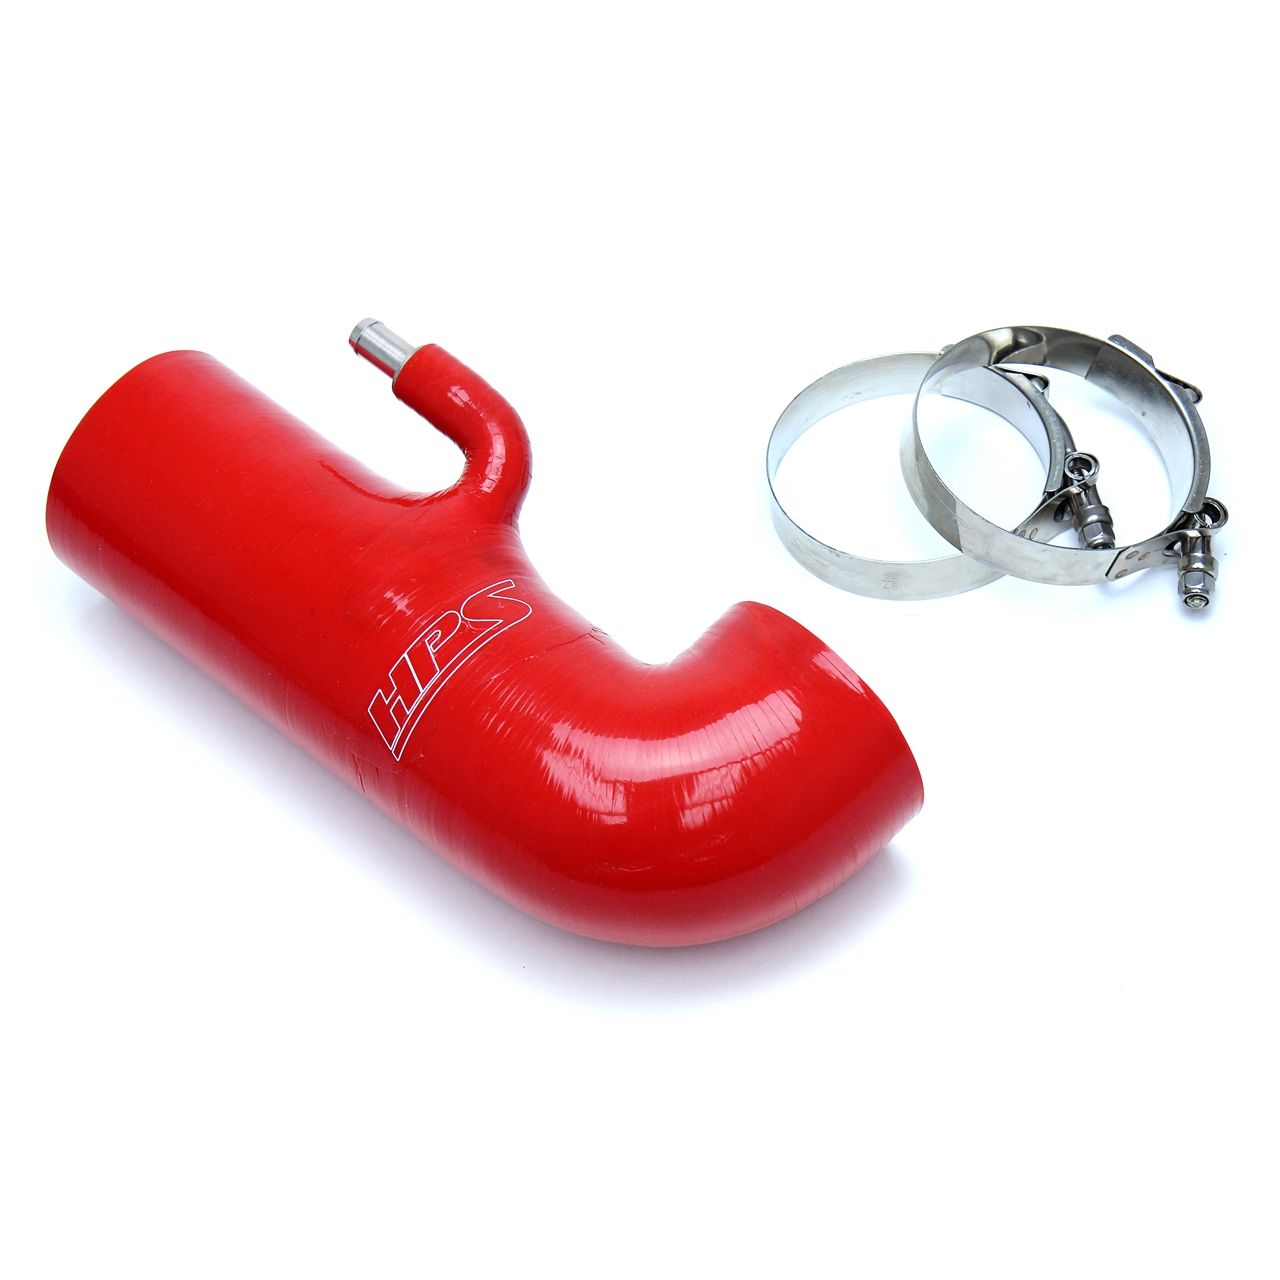 HPS Red Reinforced Silicone Post MAF Air Intake Hose Kit - Delete Stock Sound Tube for Scion 13-16 FRS